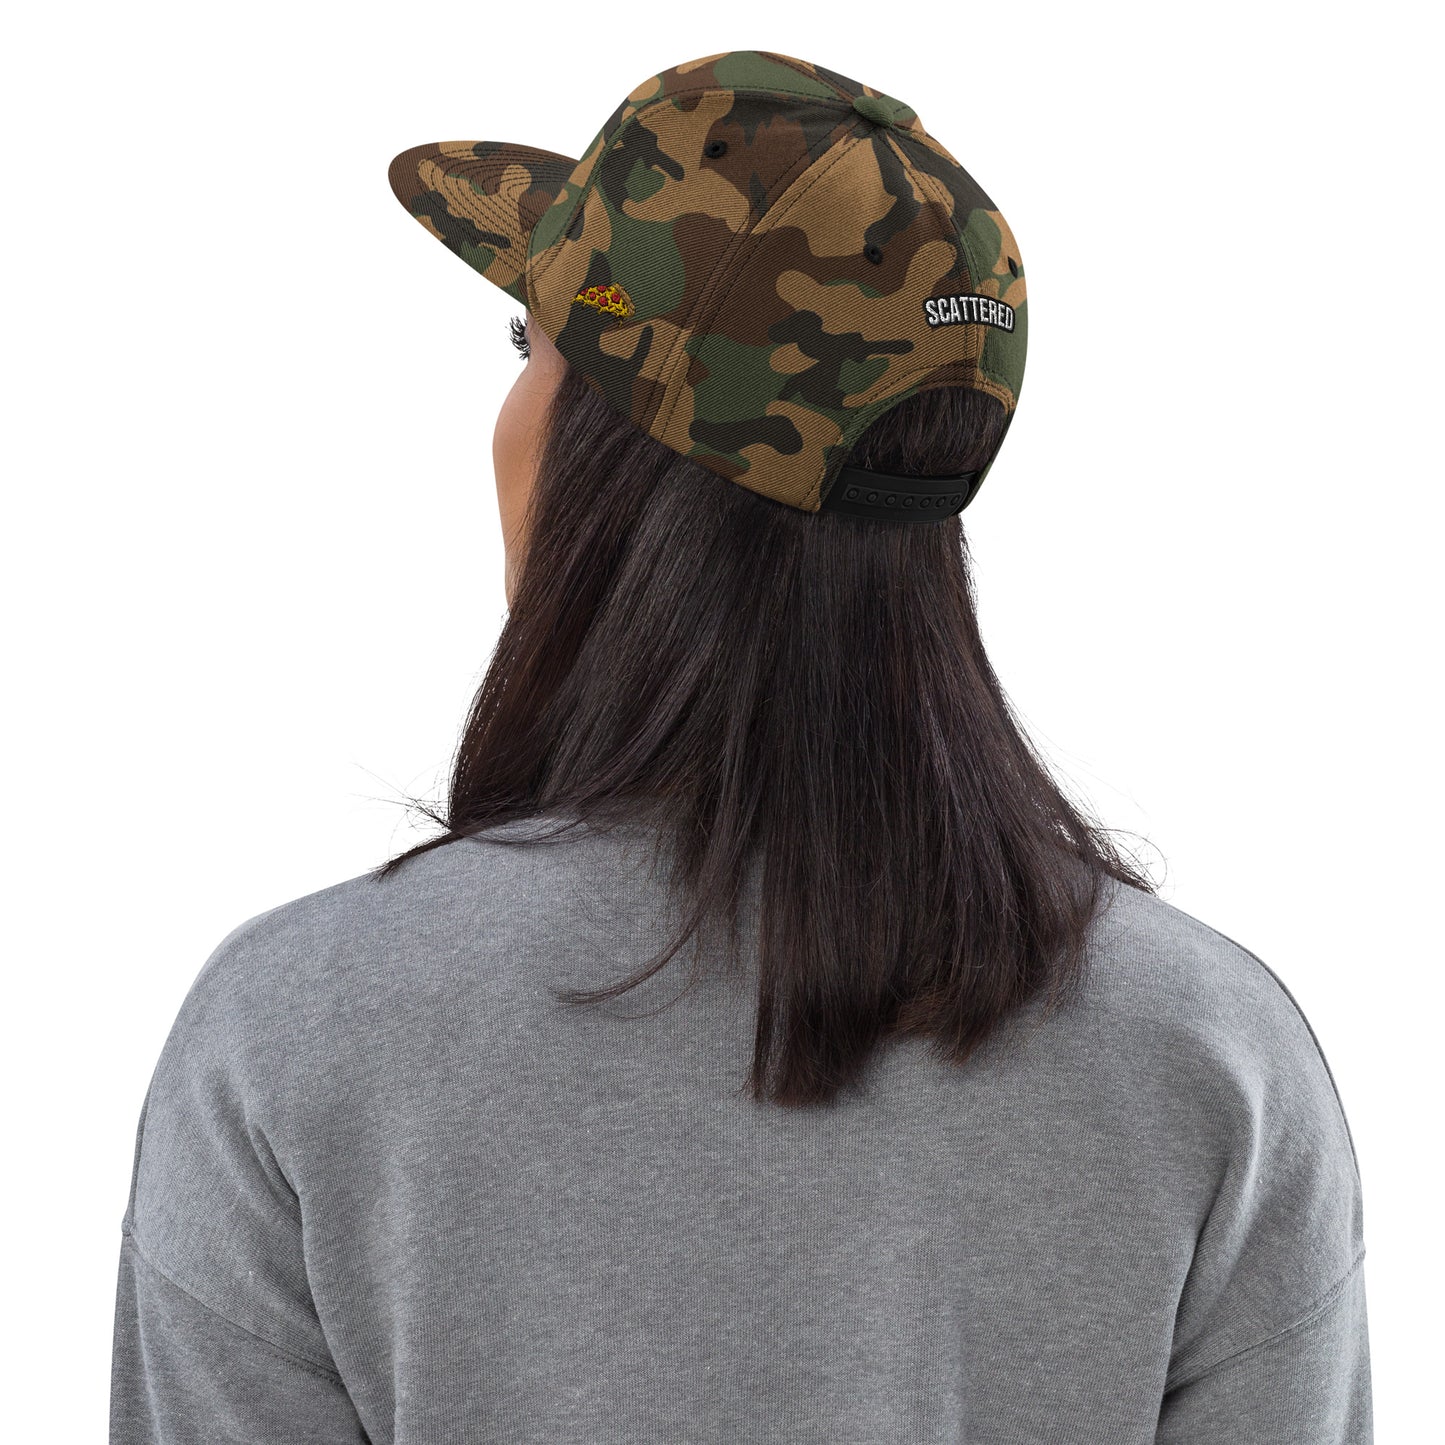 New York Apple Logo Embroidered Camo Snapback Hat (Pizza) Scattered Streetwear